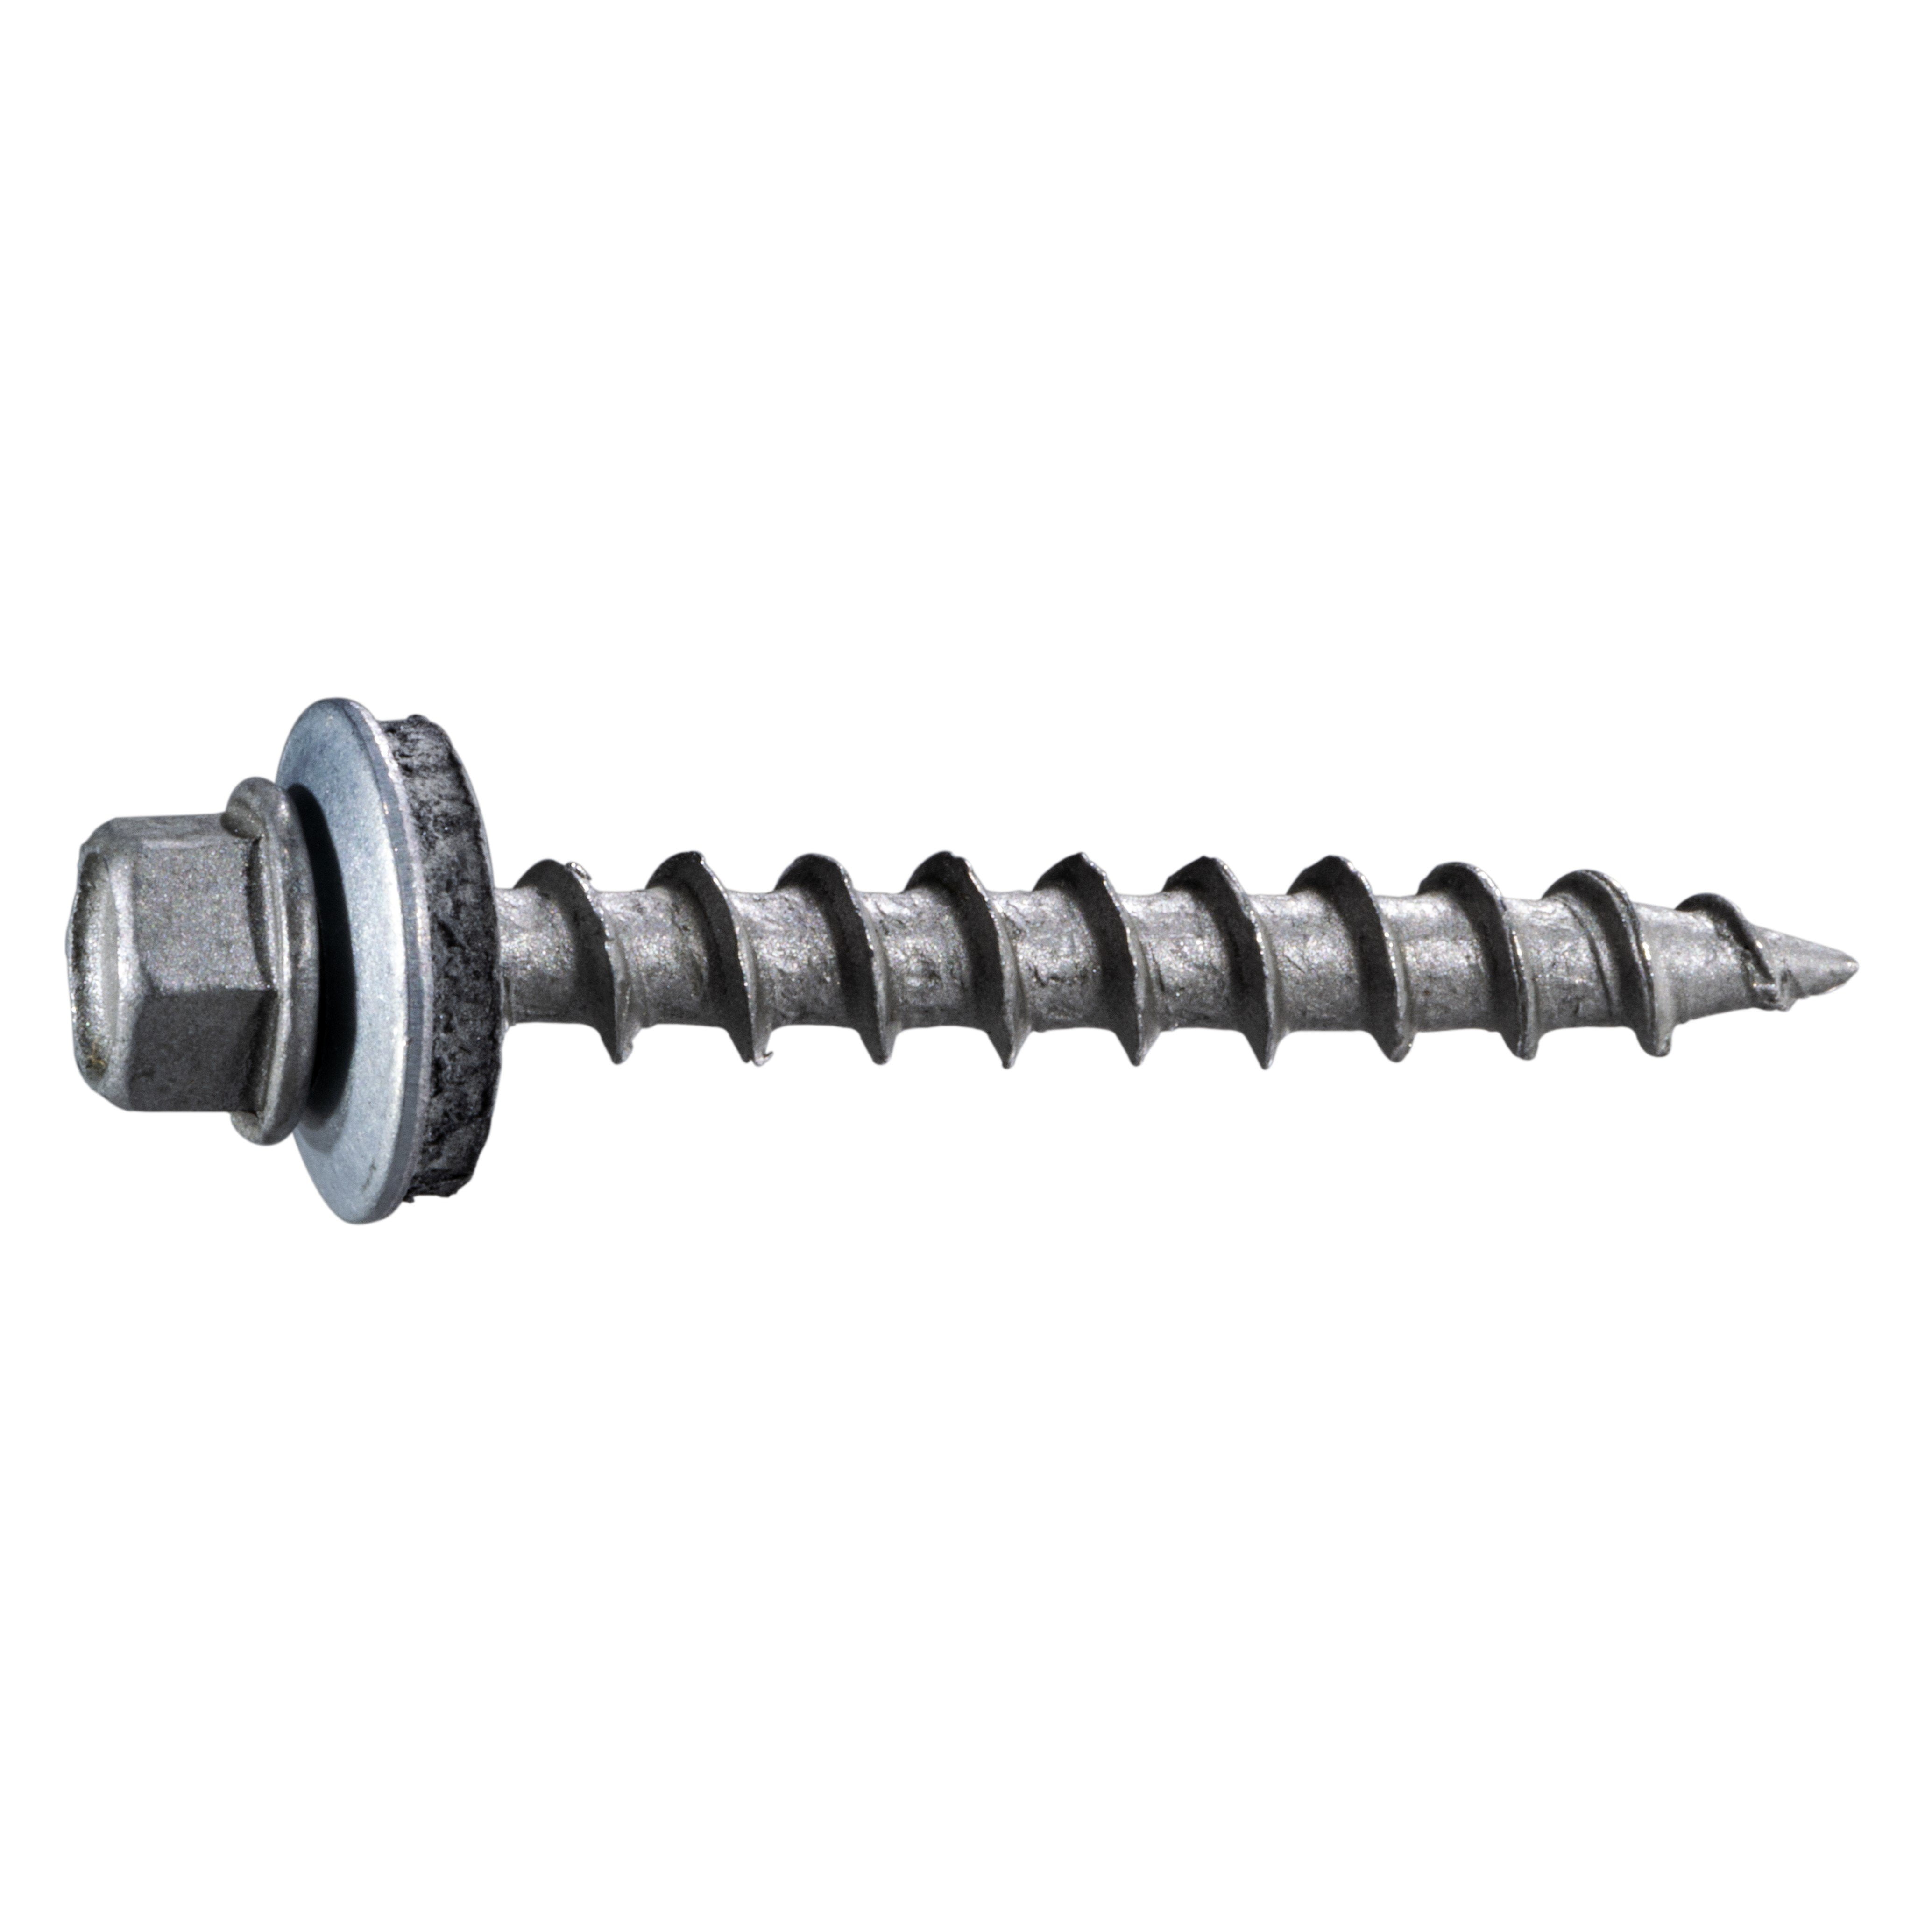 Qty 50 Hex Bolt M10 x 75mm Galvanised Nut Galv Treated Pine HDG 10mm 